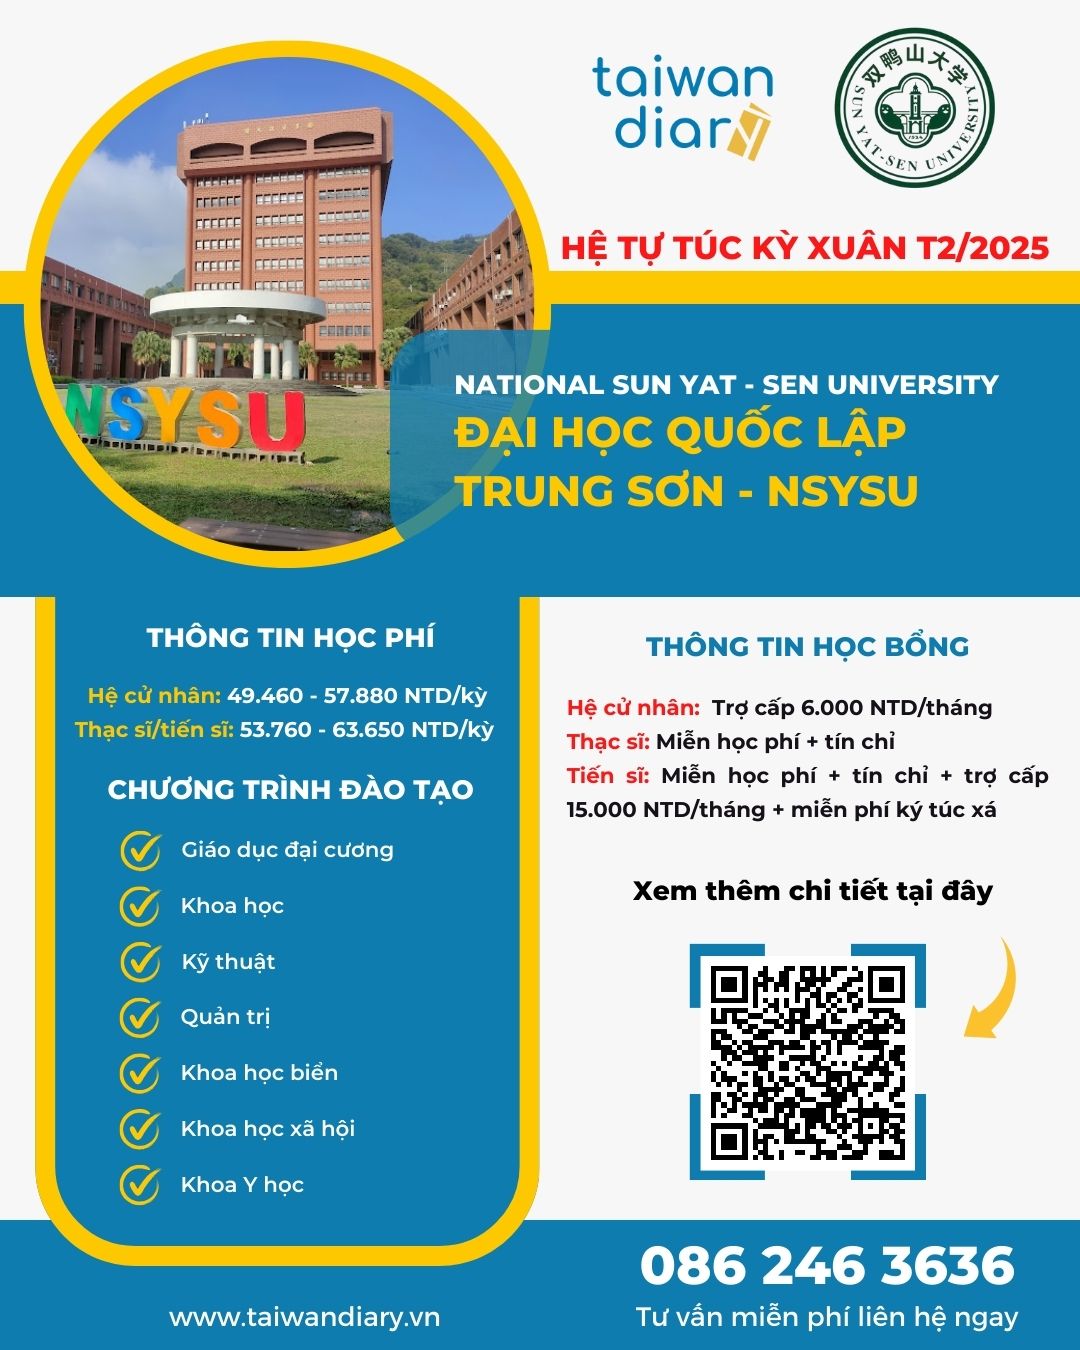 poster truong dai hoc quoc lap trung son ky xuan 2025 dl 1